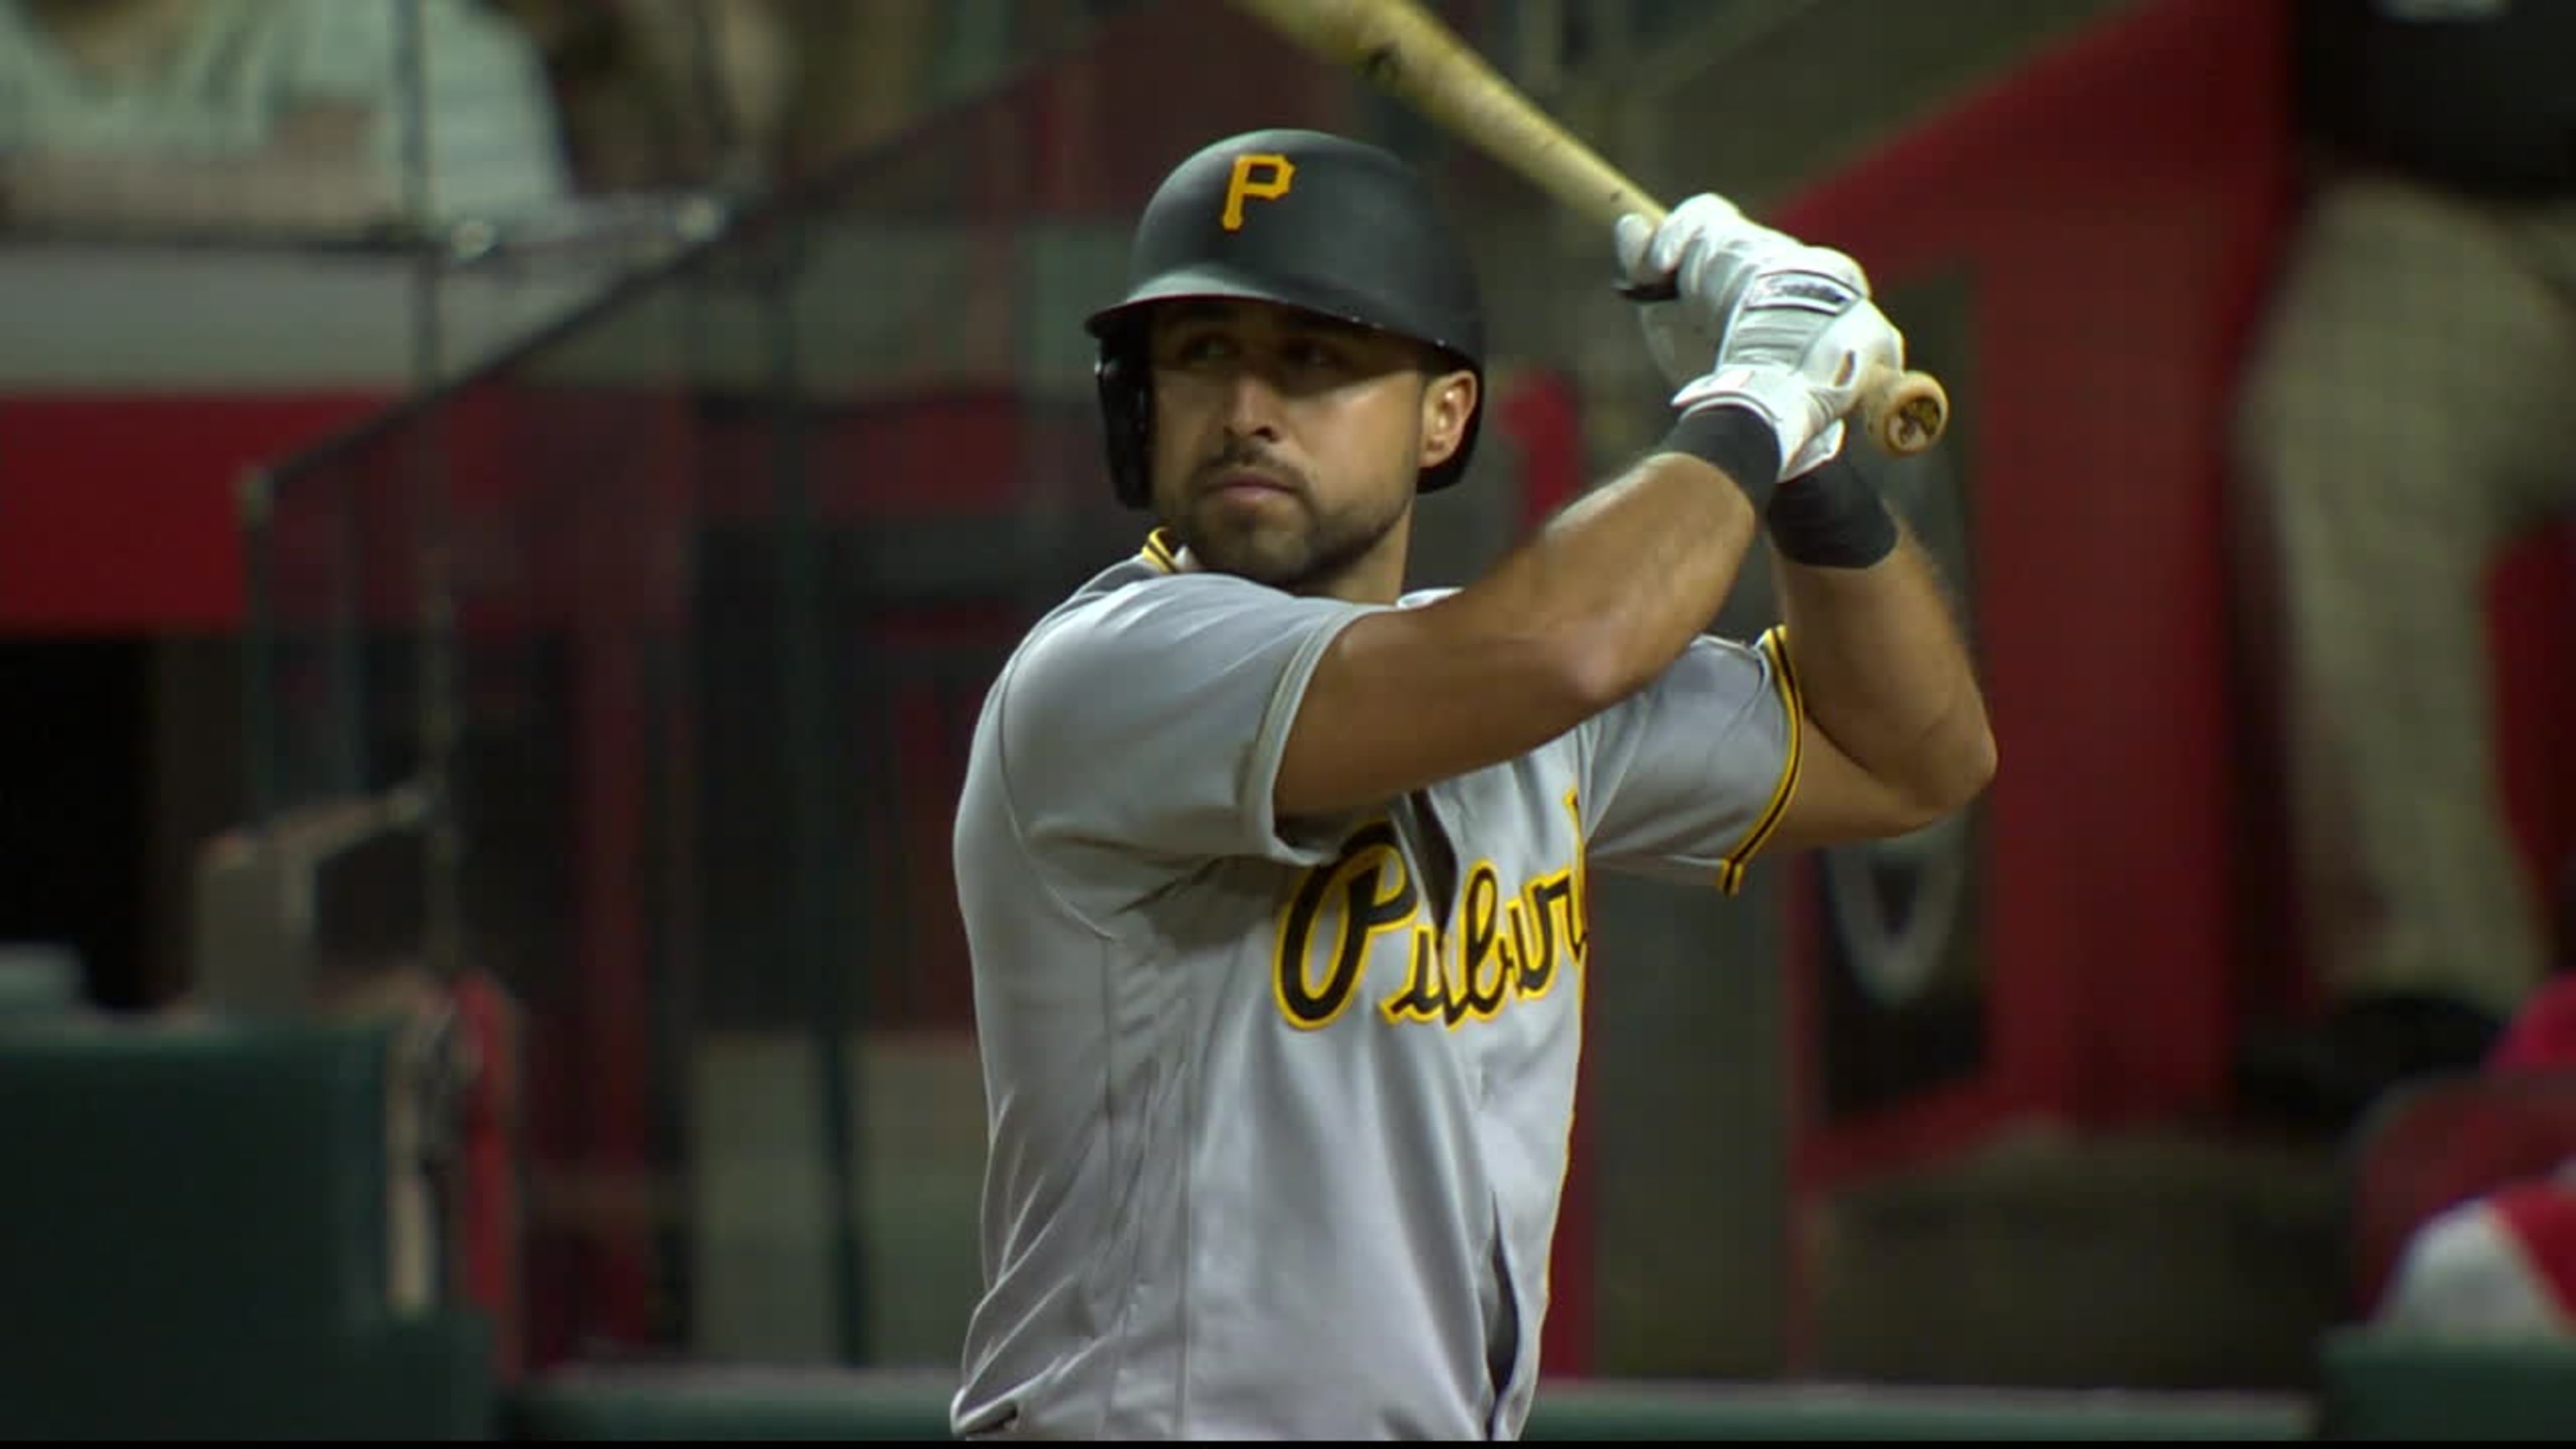 Pirates overcome 9-run deficit for first time since team started